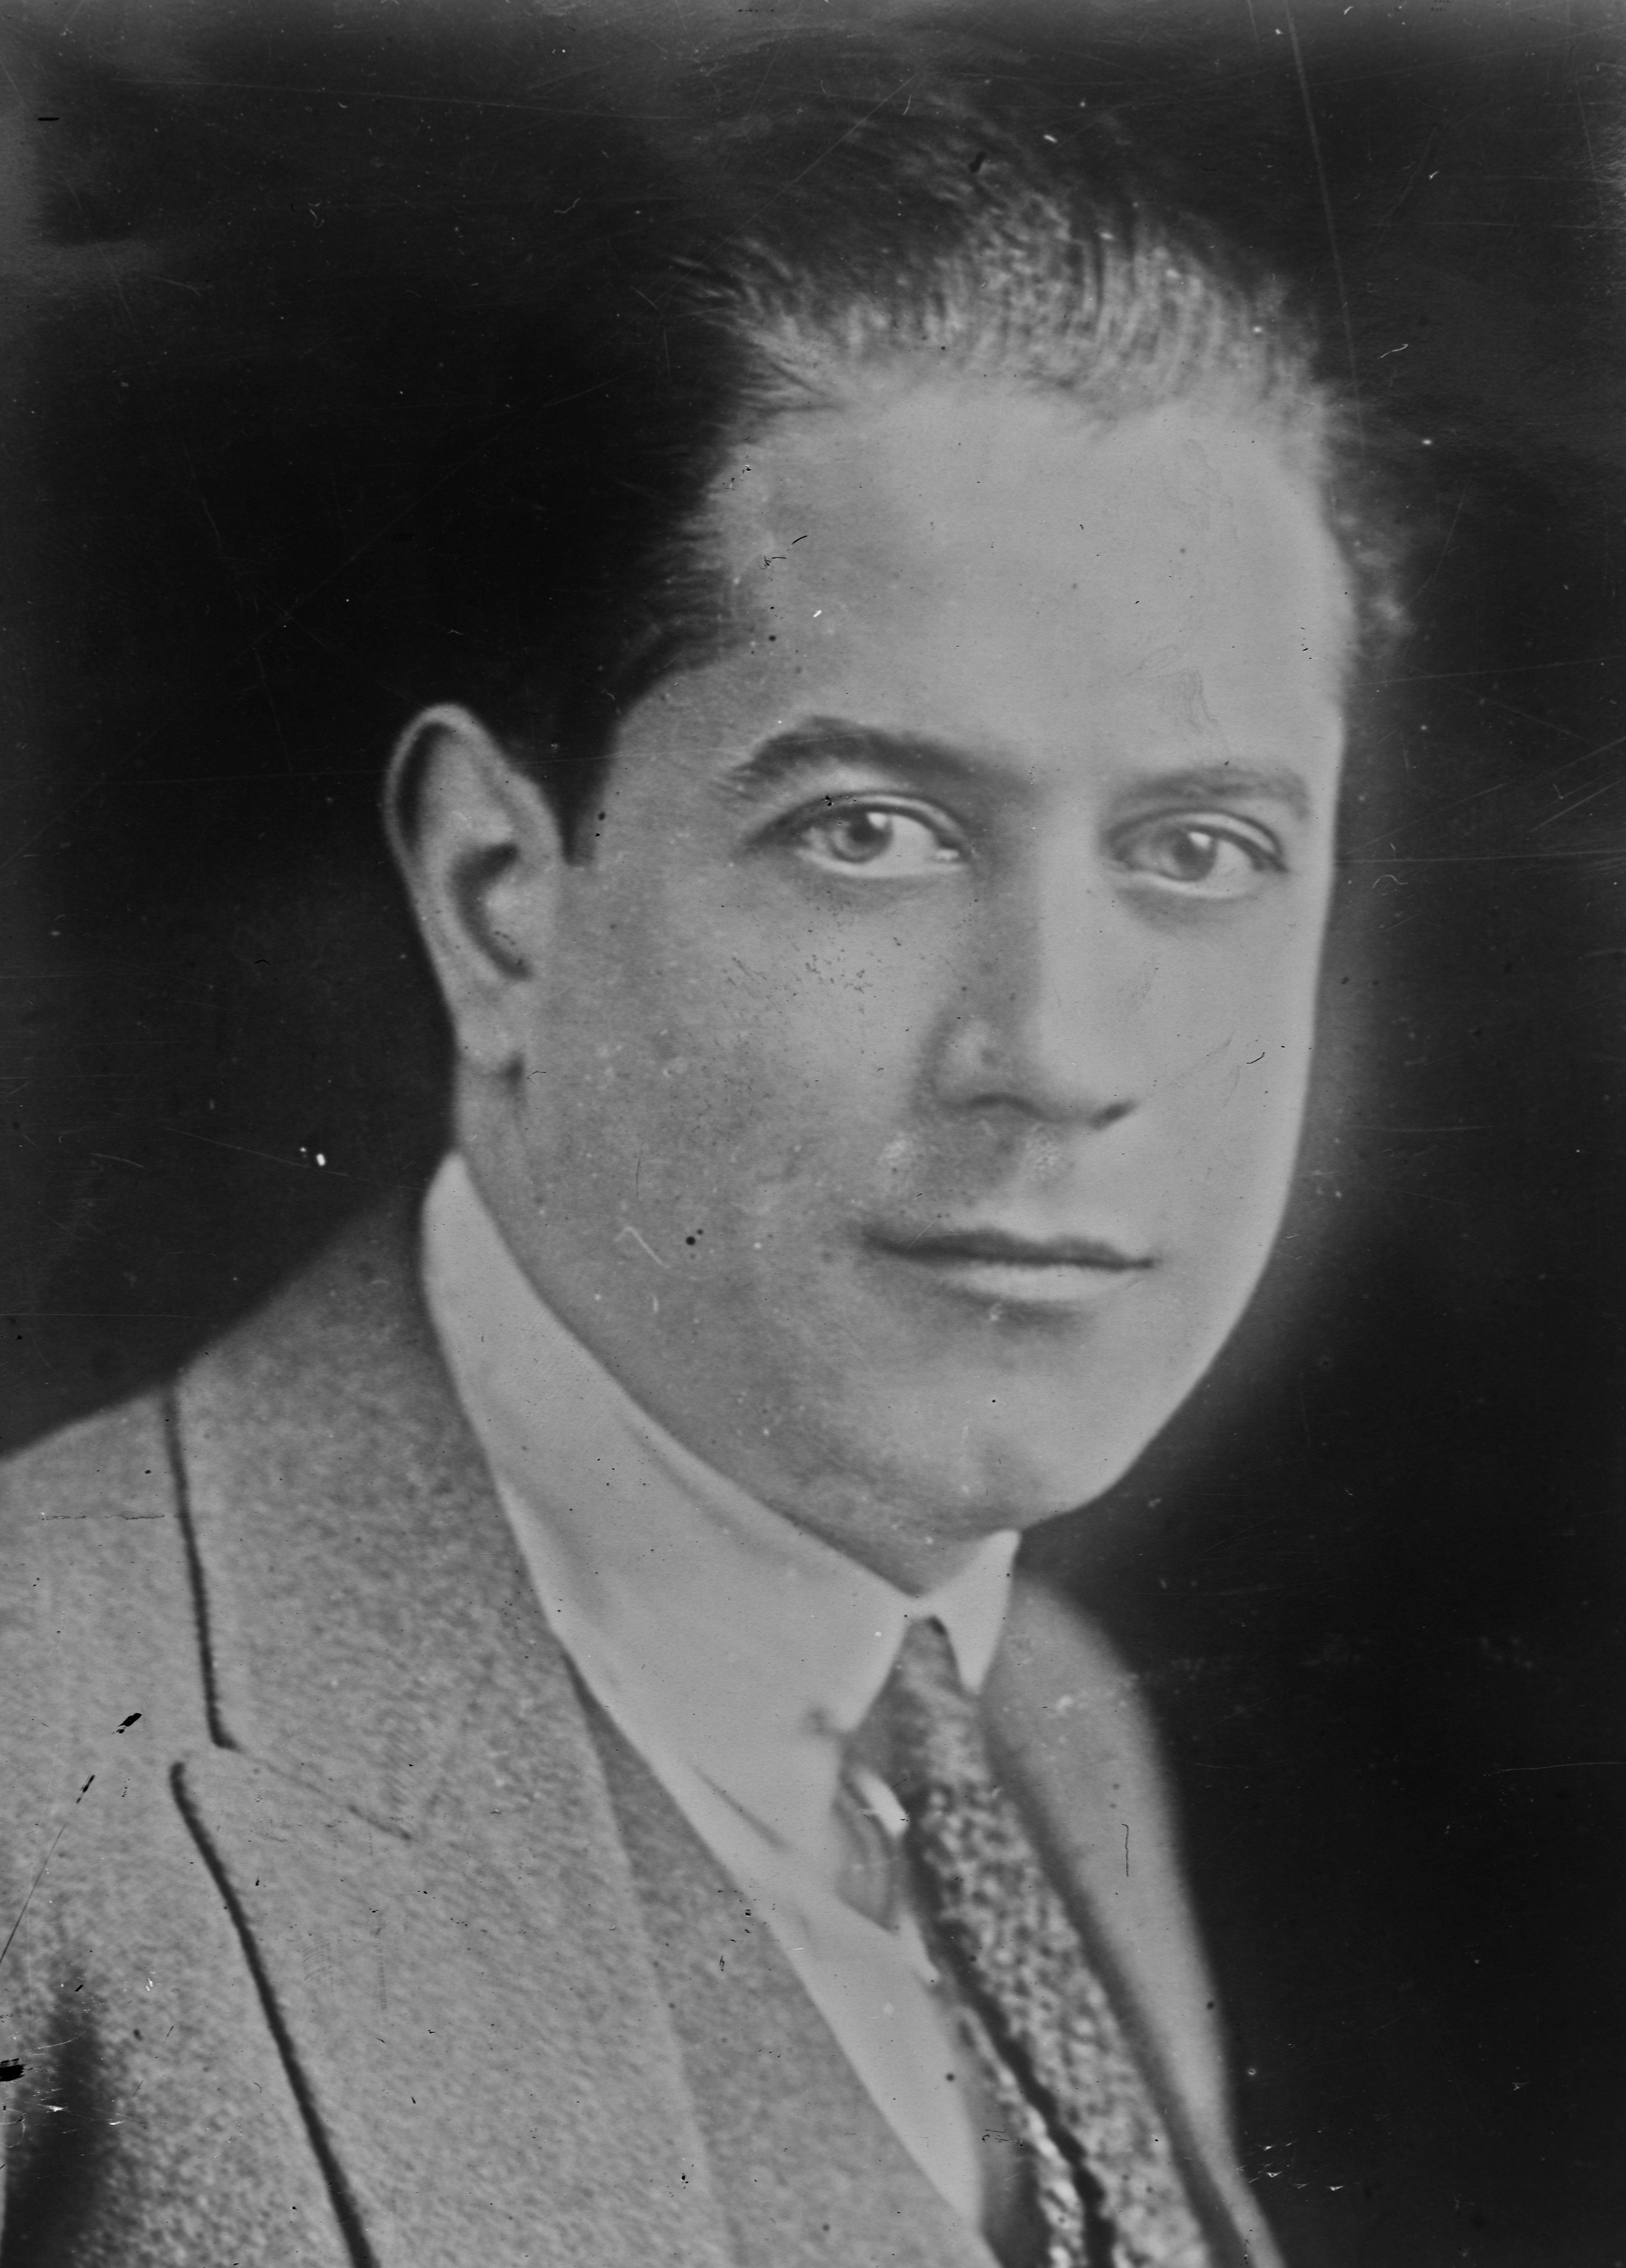 Jose Raul Capablanca Photos and Images